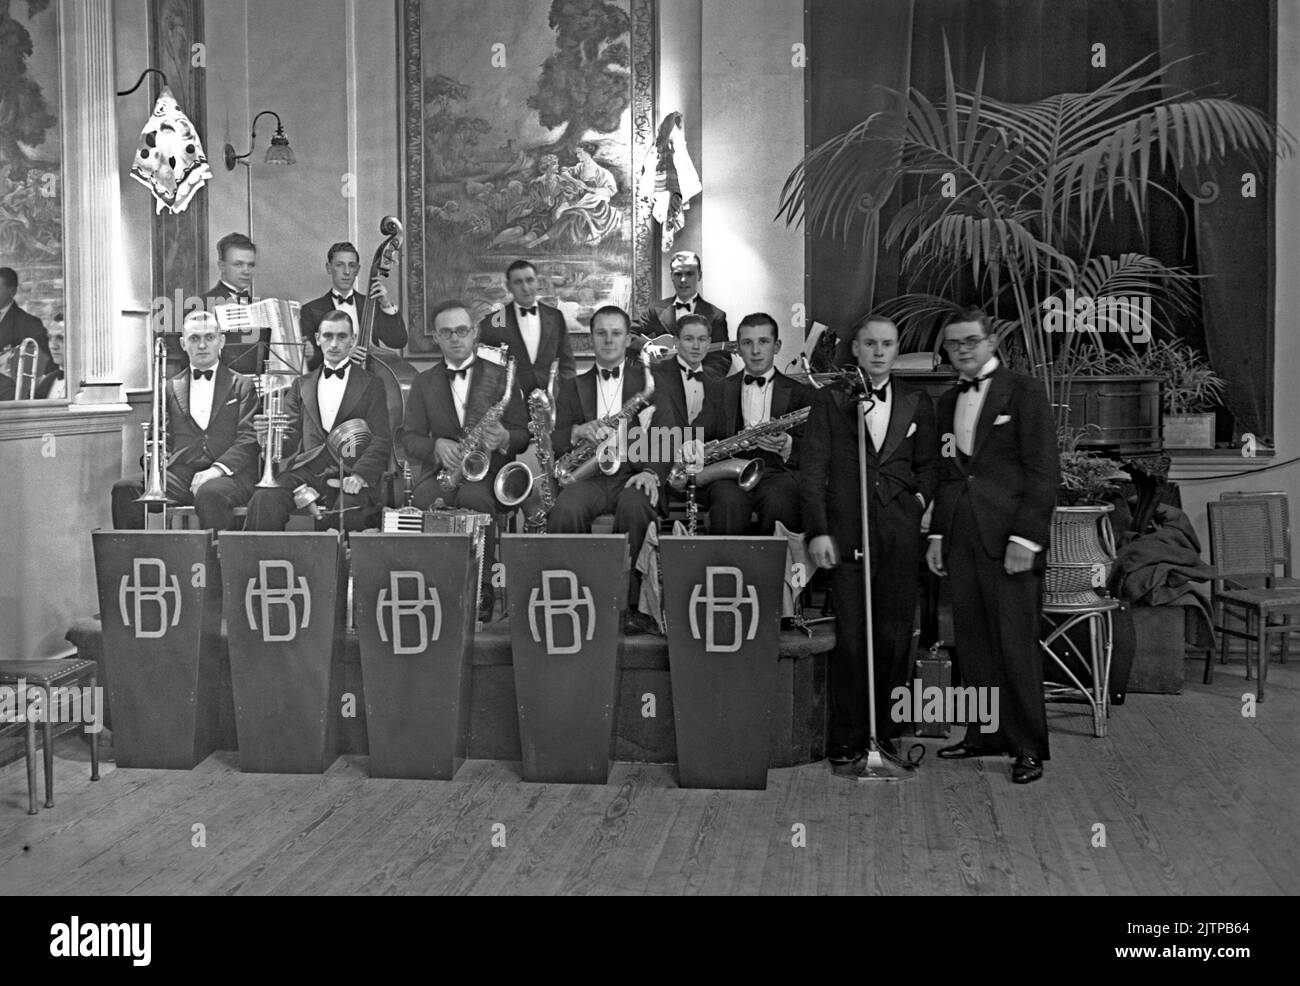 A British dance band, The Harry Blake Orchestra, at the Portman Rooms, Baker Street, London, UK in November 1937. With 12 members, this was a sizable band and, unusually for the time, included a bass player and guitarist. Blake is photographed on the right. Early dance and swing bands had their heyday in the UK during the 1920s–30s. Bands played in dance halls and hotel ballrooms. They played melodic, good-time music and individual players would play in several bands. This image is from an old glass negative – a vintage 1930s photograph. Stock Photo